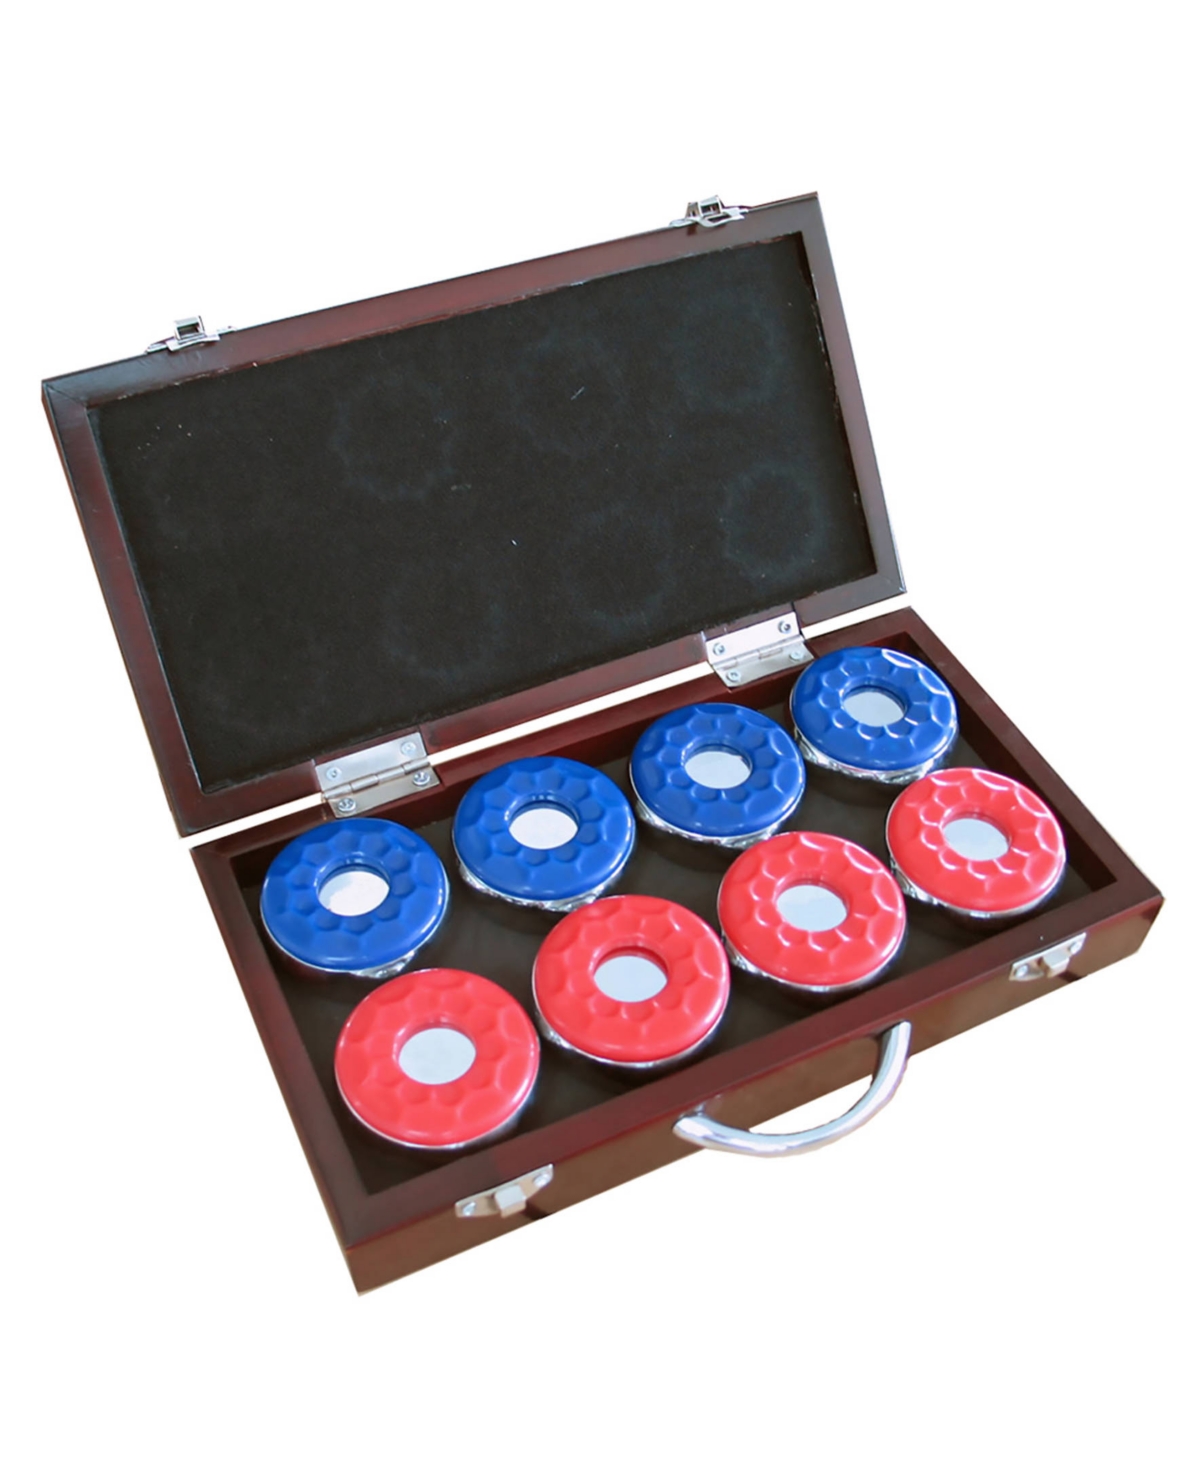 Shuffleboard Pucks with Case, Set of 8 - Red